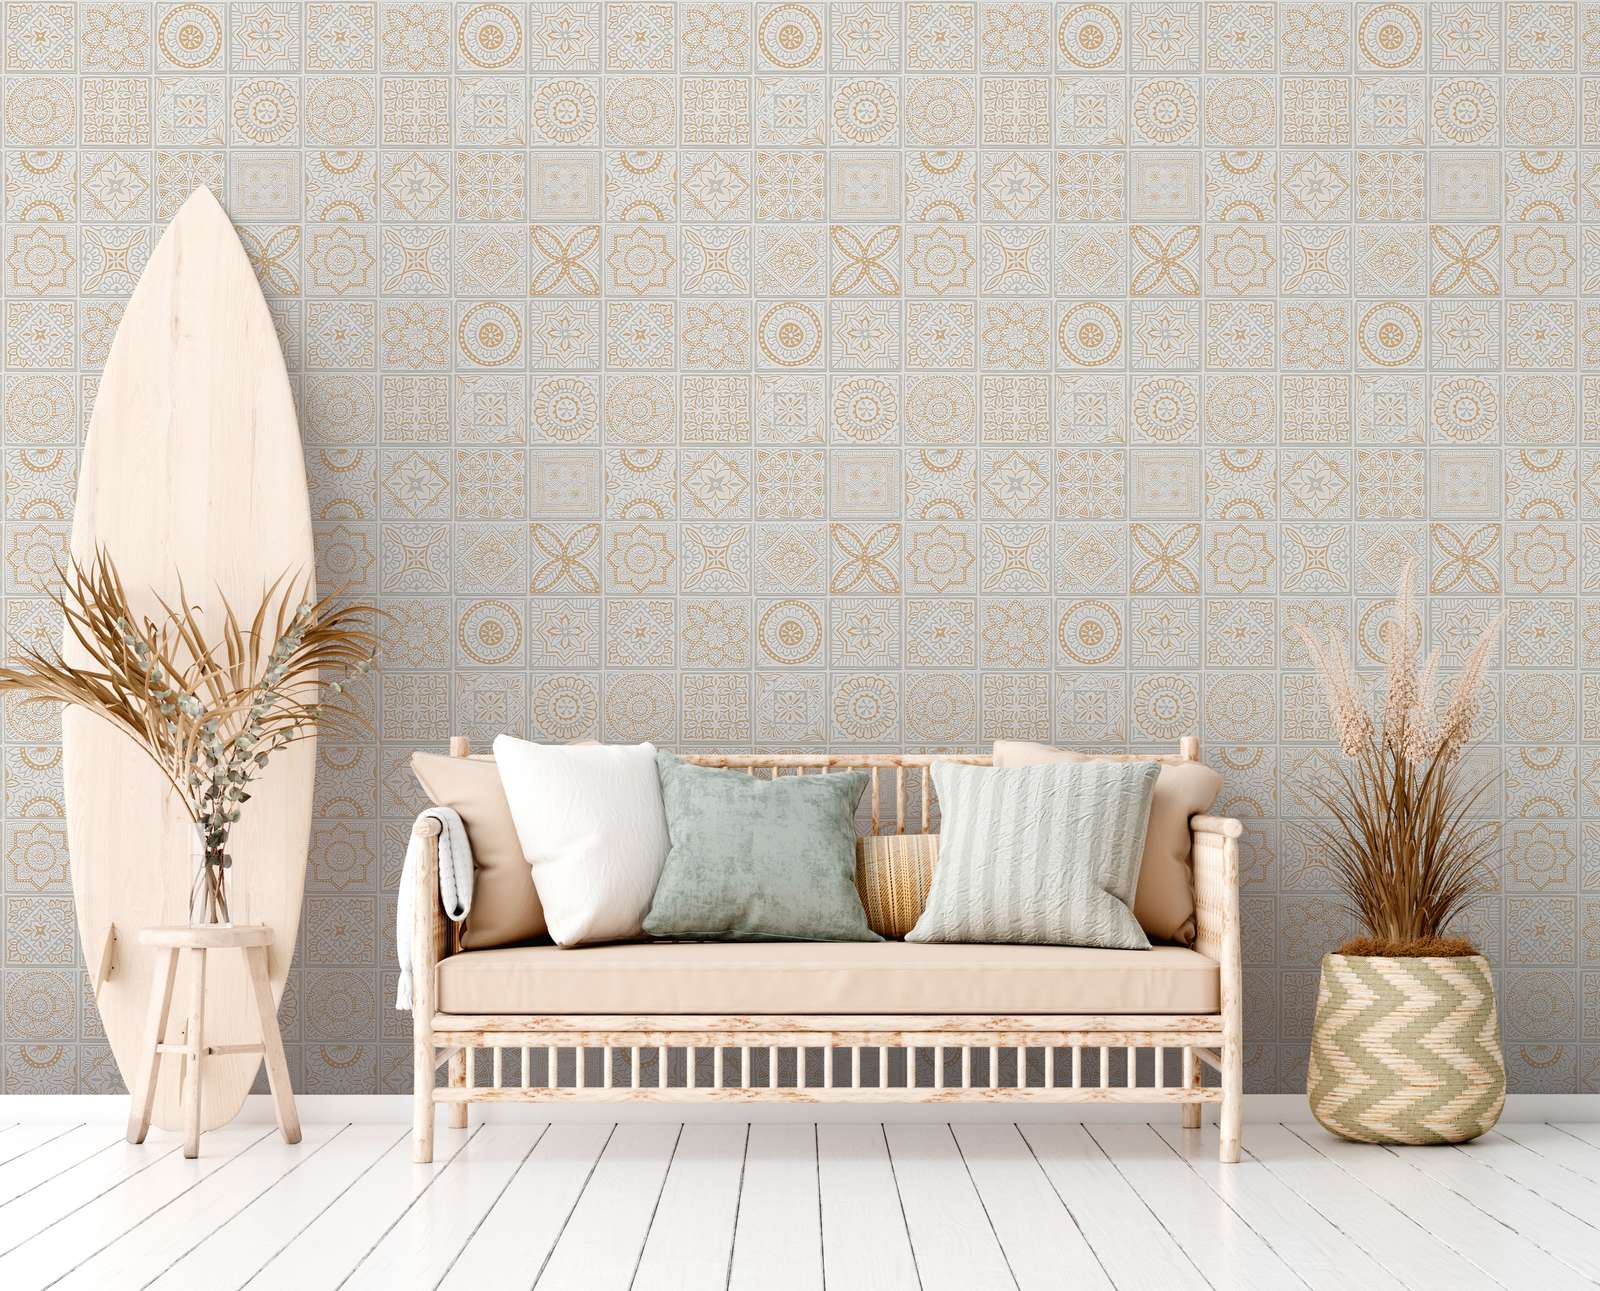             Tile look non-woven wallpaper with floral mosaics - gold, grey, white
        